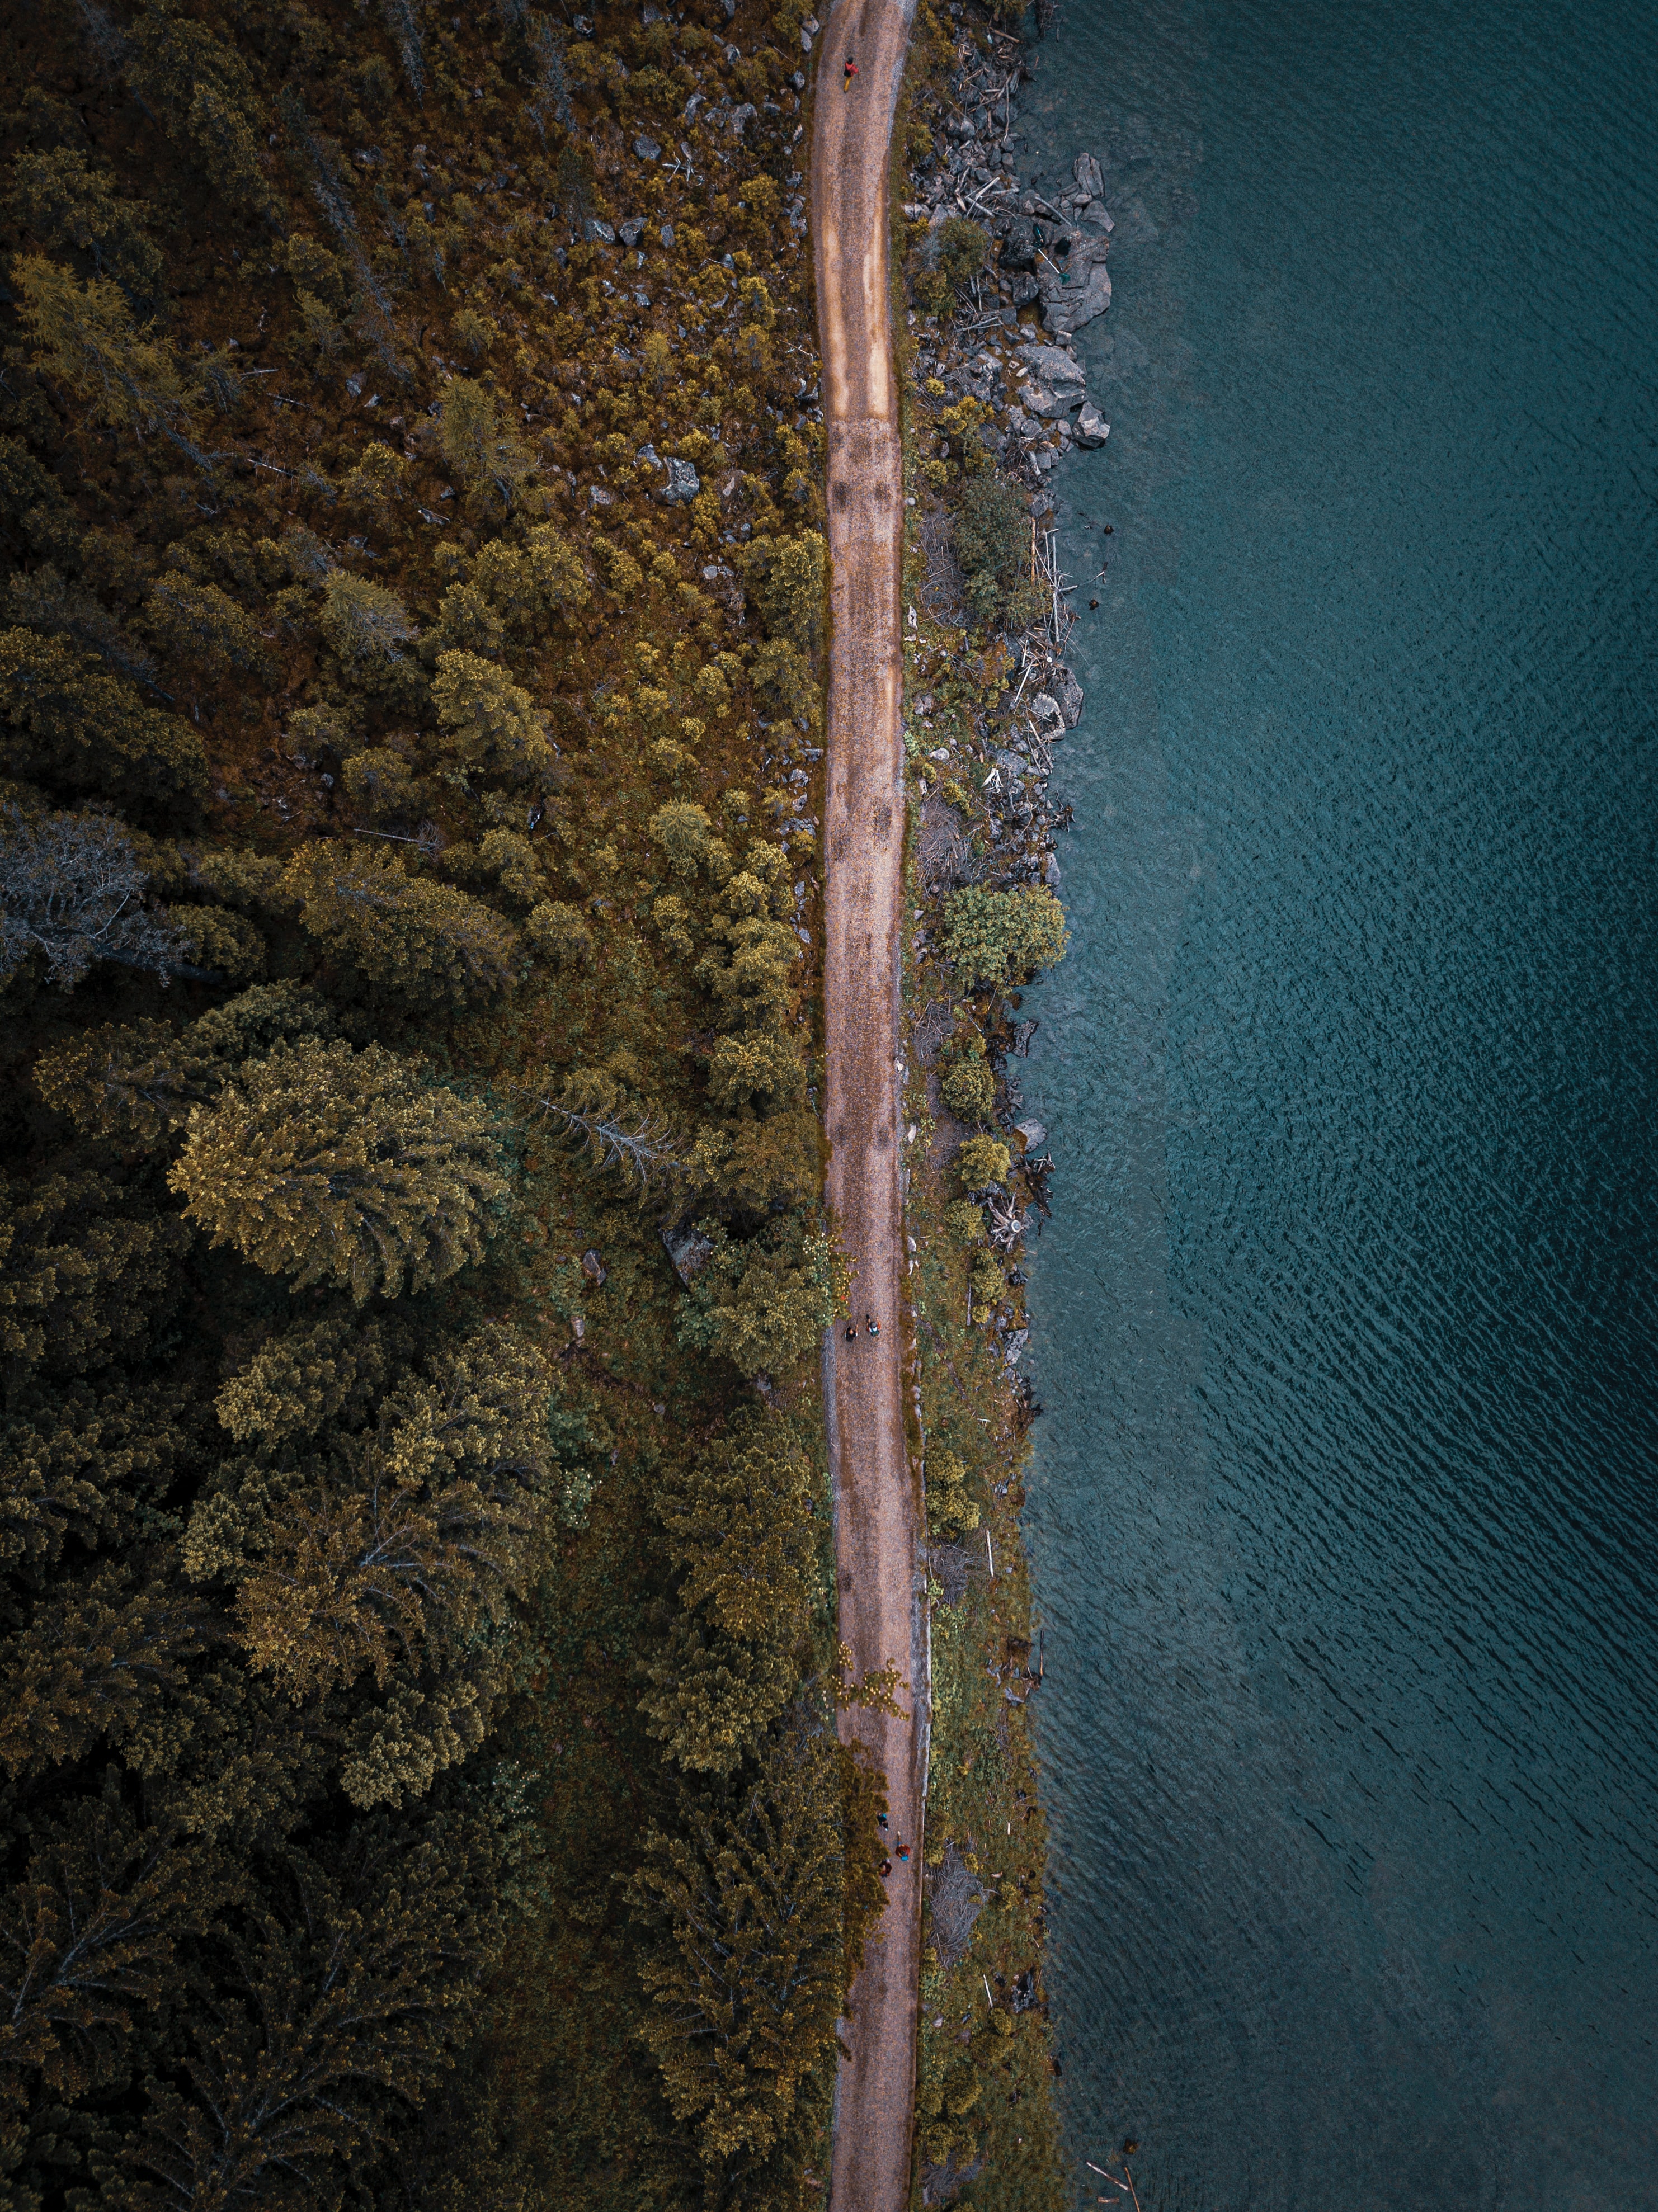 view from above, nature, trees, sea, road, forest